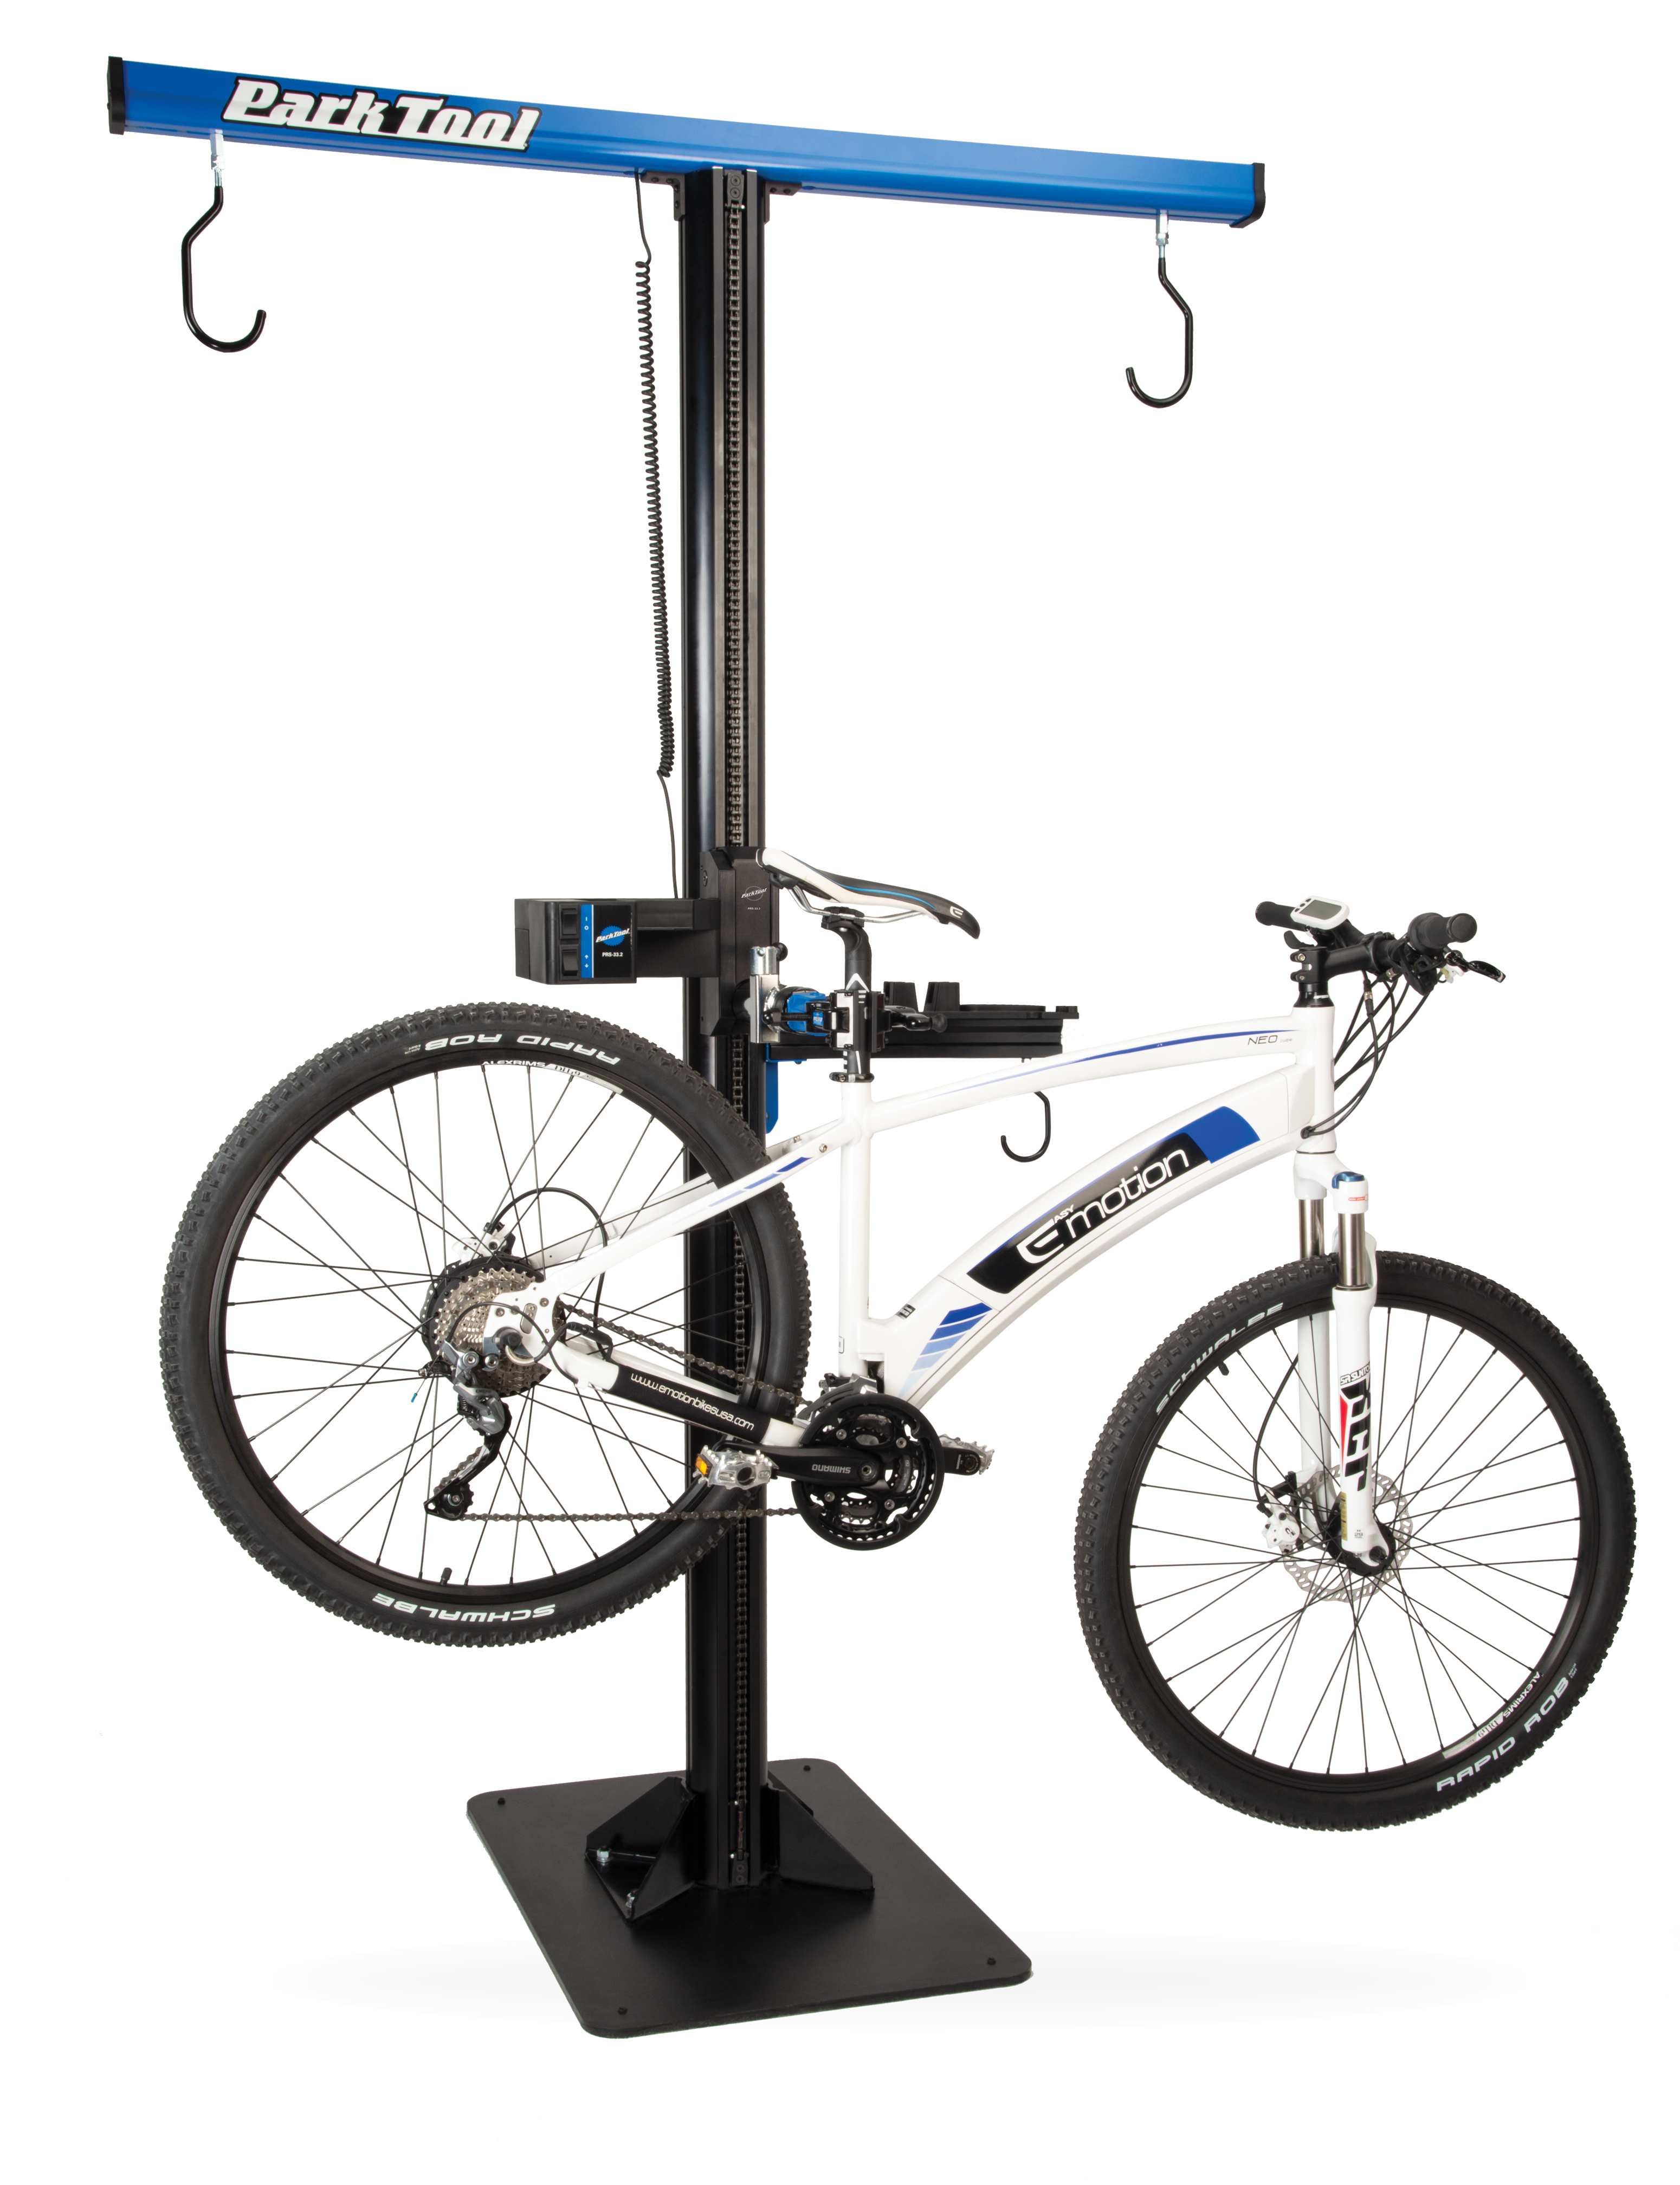 Park Tool PRS-33.2 Power Lift Shop Stand holding a bike